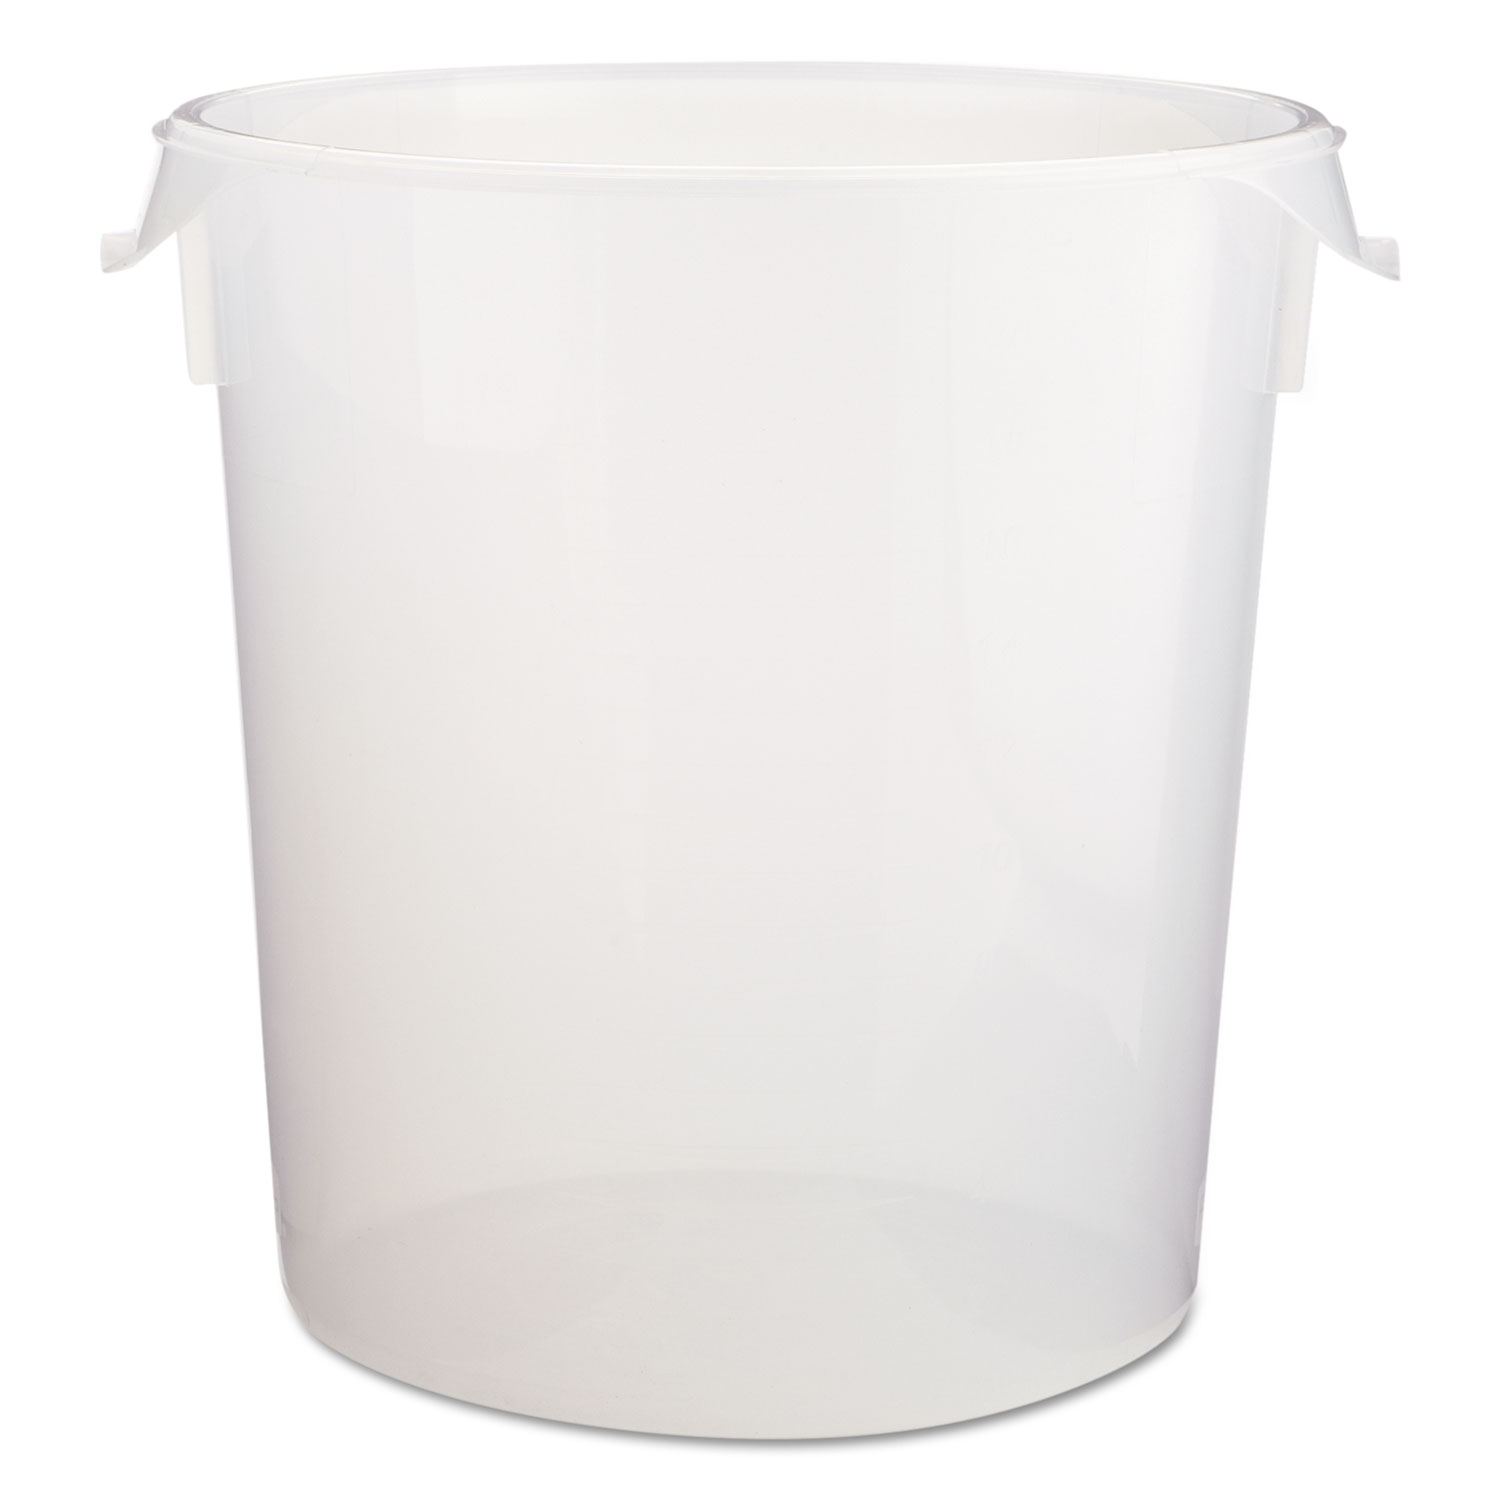  Rubbermaid Commercial FG572824CLR Round Storage Containers, Clear, 22qt, 13 1/8Dia x 14H, Polypropylene,6/Crtn (RCP572824CLECT) 